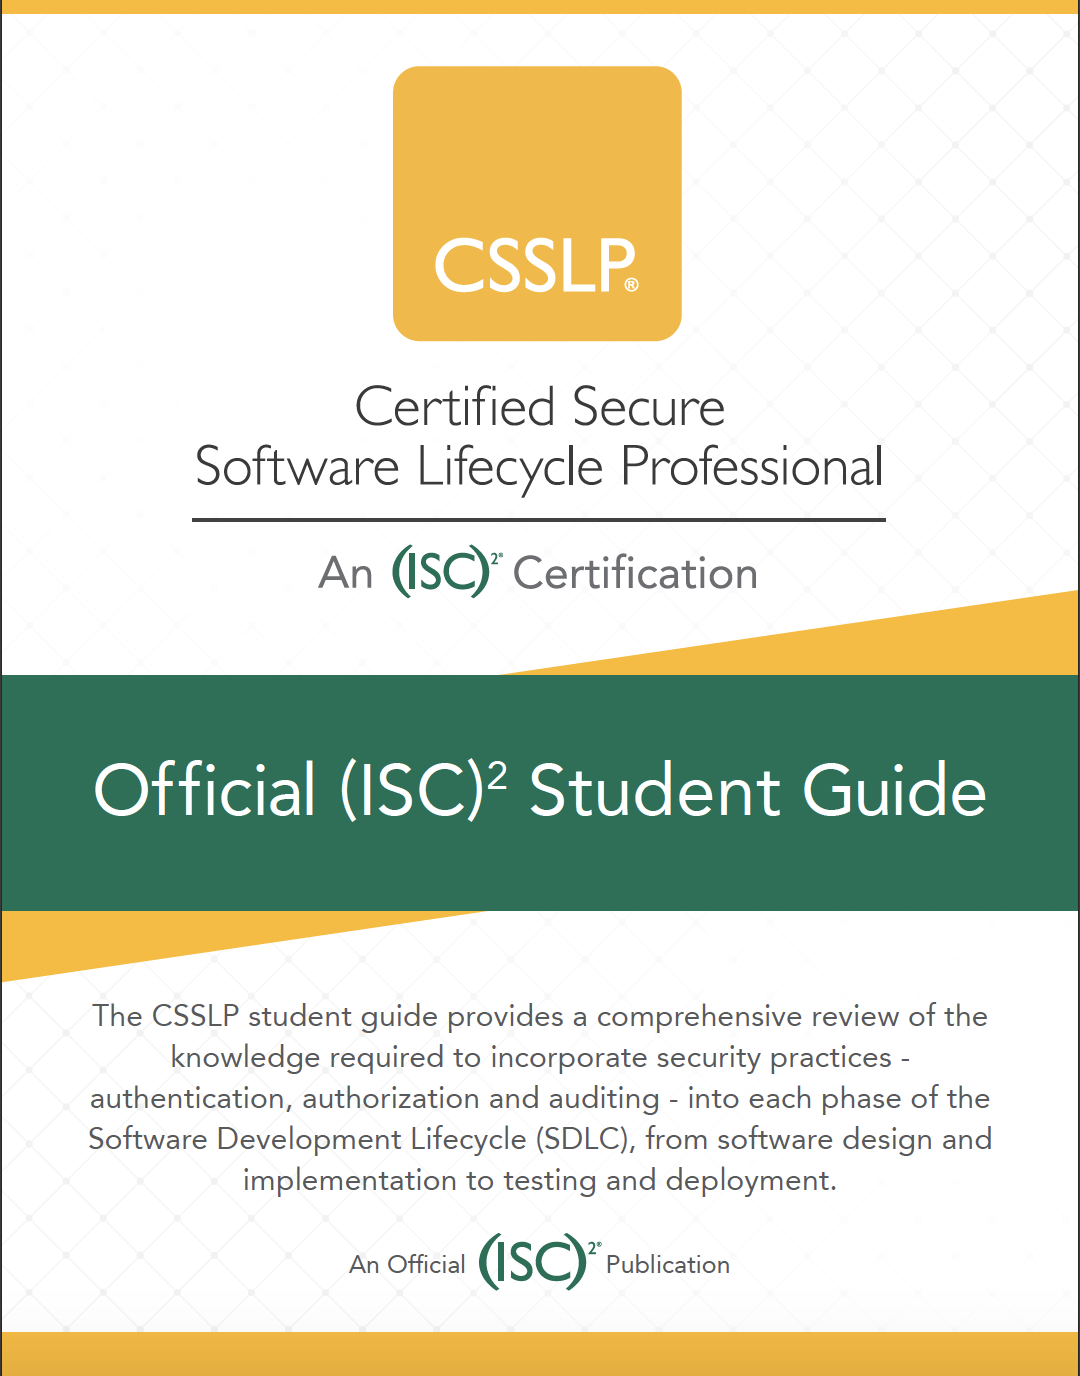 Official ISC Student Guide（日本語版もあり） - www.buyfromhill.com